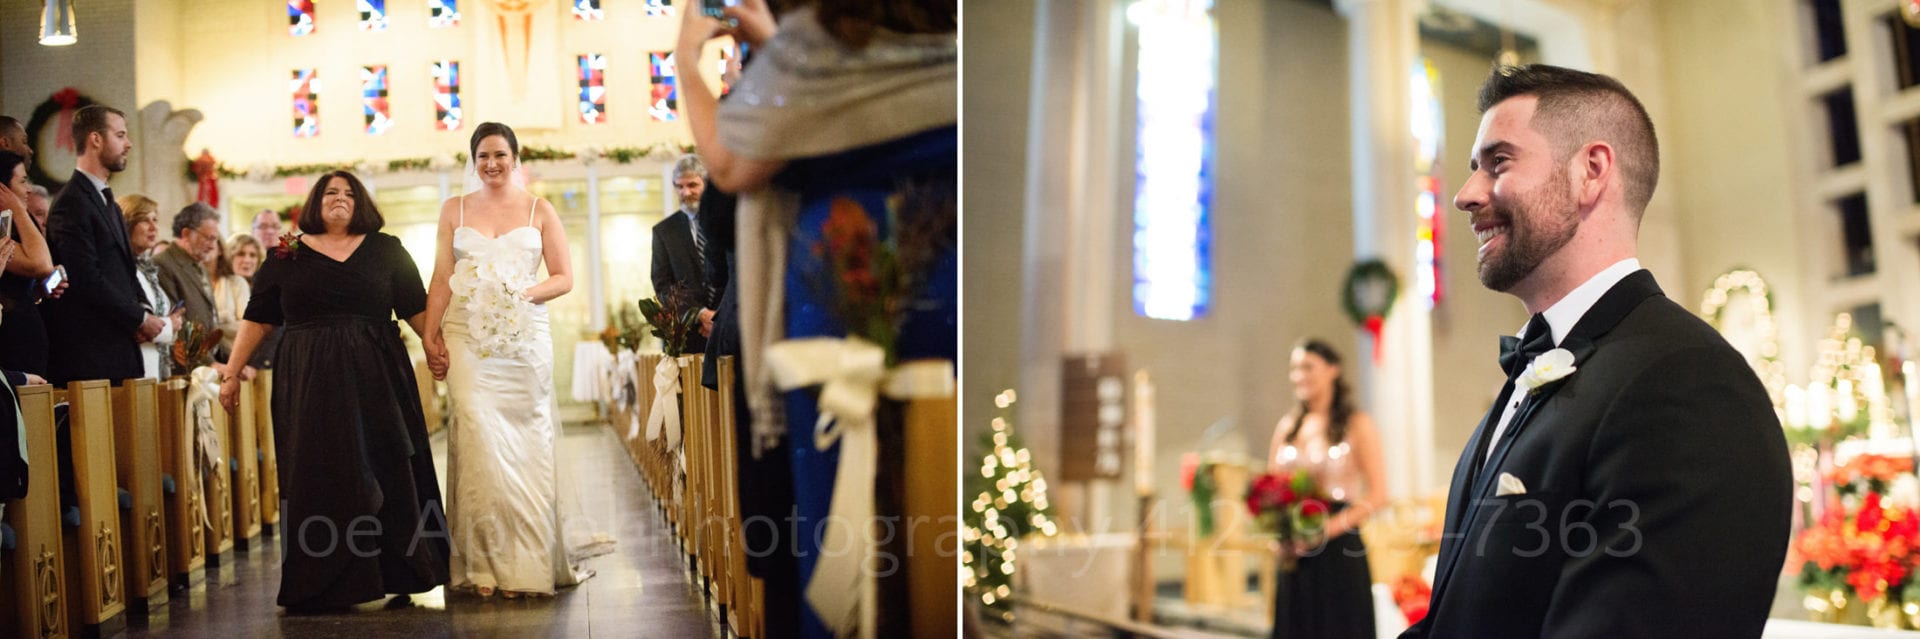 Two photos: A bride and her mother hold hands as they walk down the aisle of a church with stained glass windows behind them. The second photo shows a groom smiling as he looks towards the left side of the frame at his bride (unseen) walking towards him.